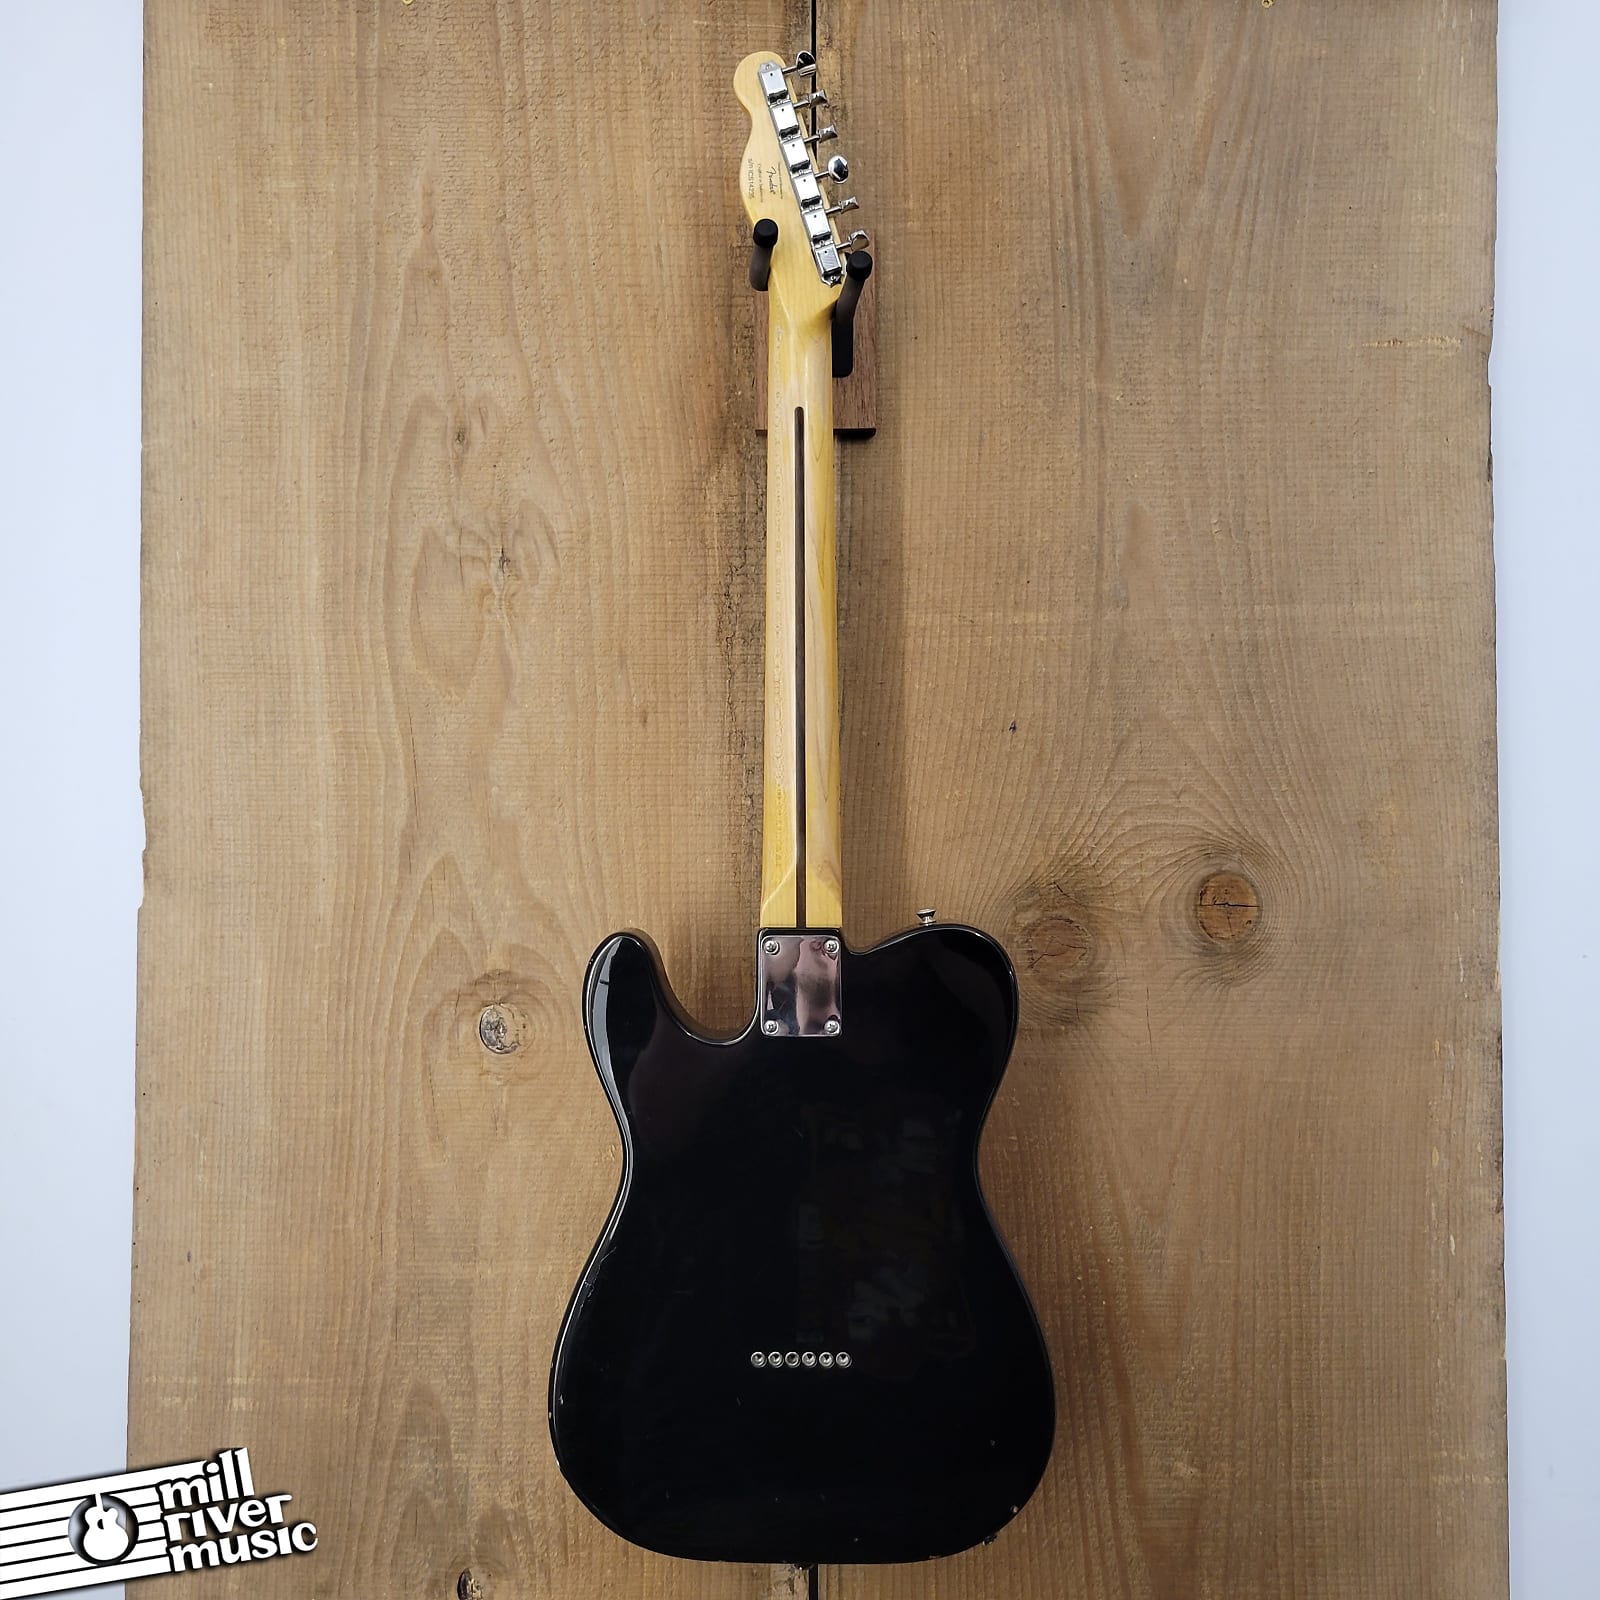 Squier Thinline Telecaster Indonesia Electric Guitar Used